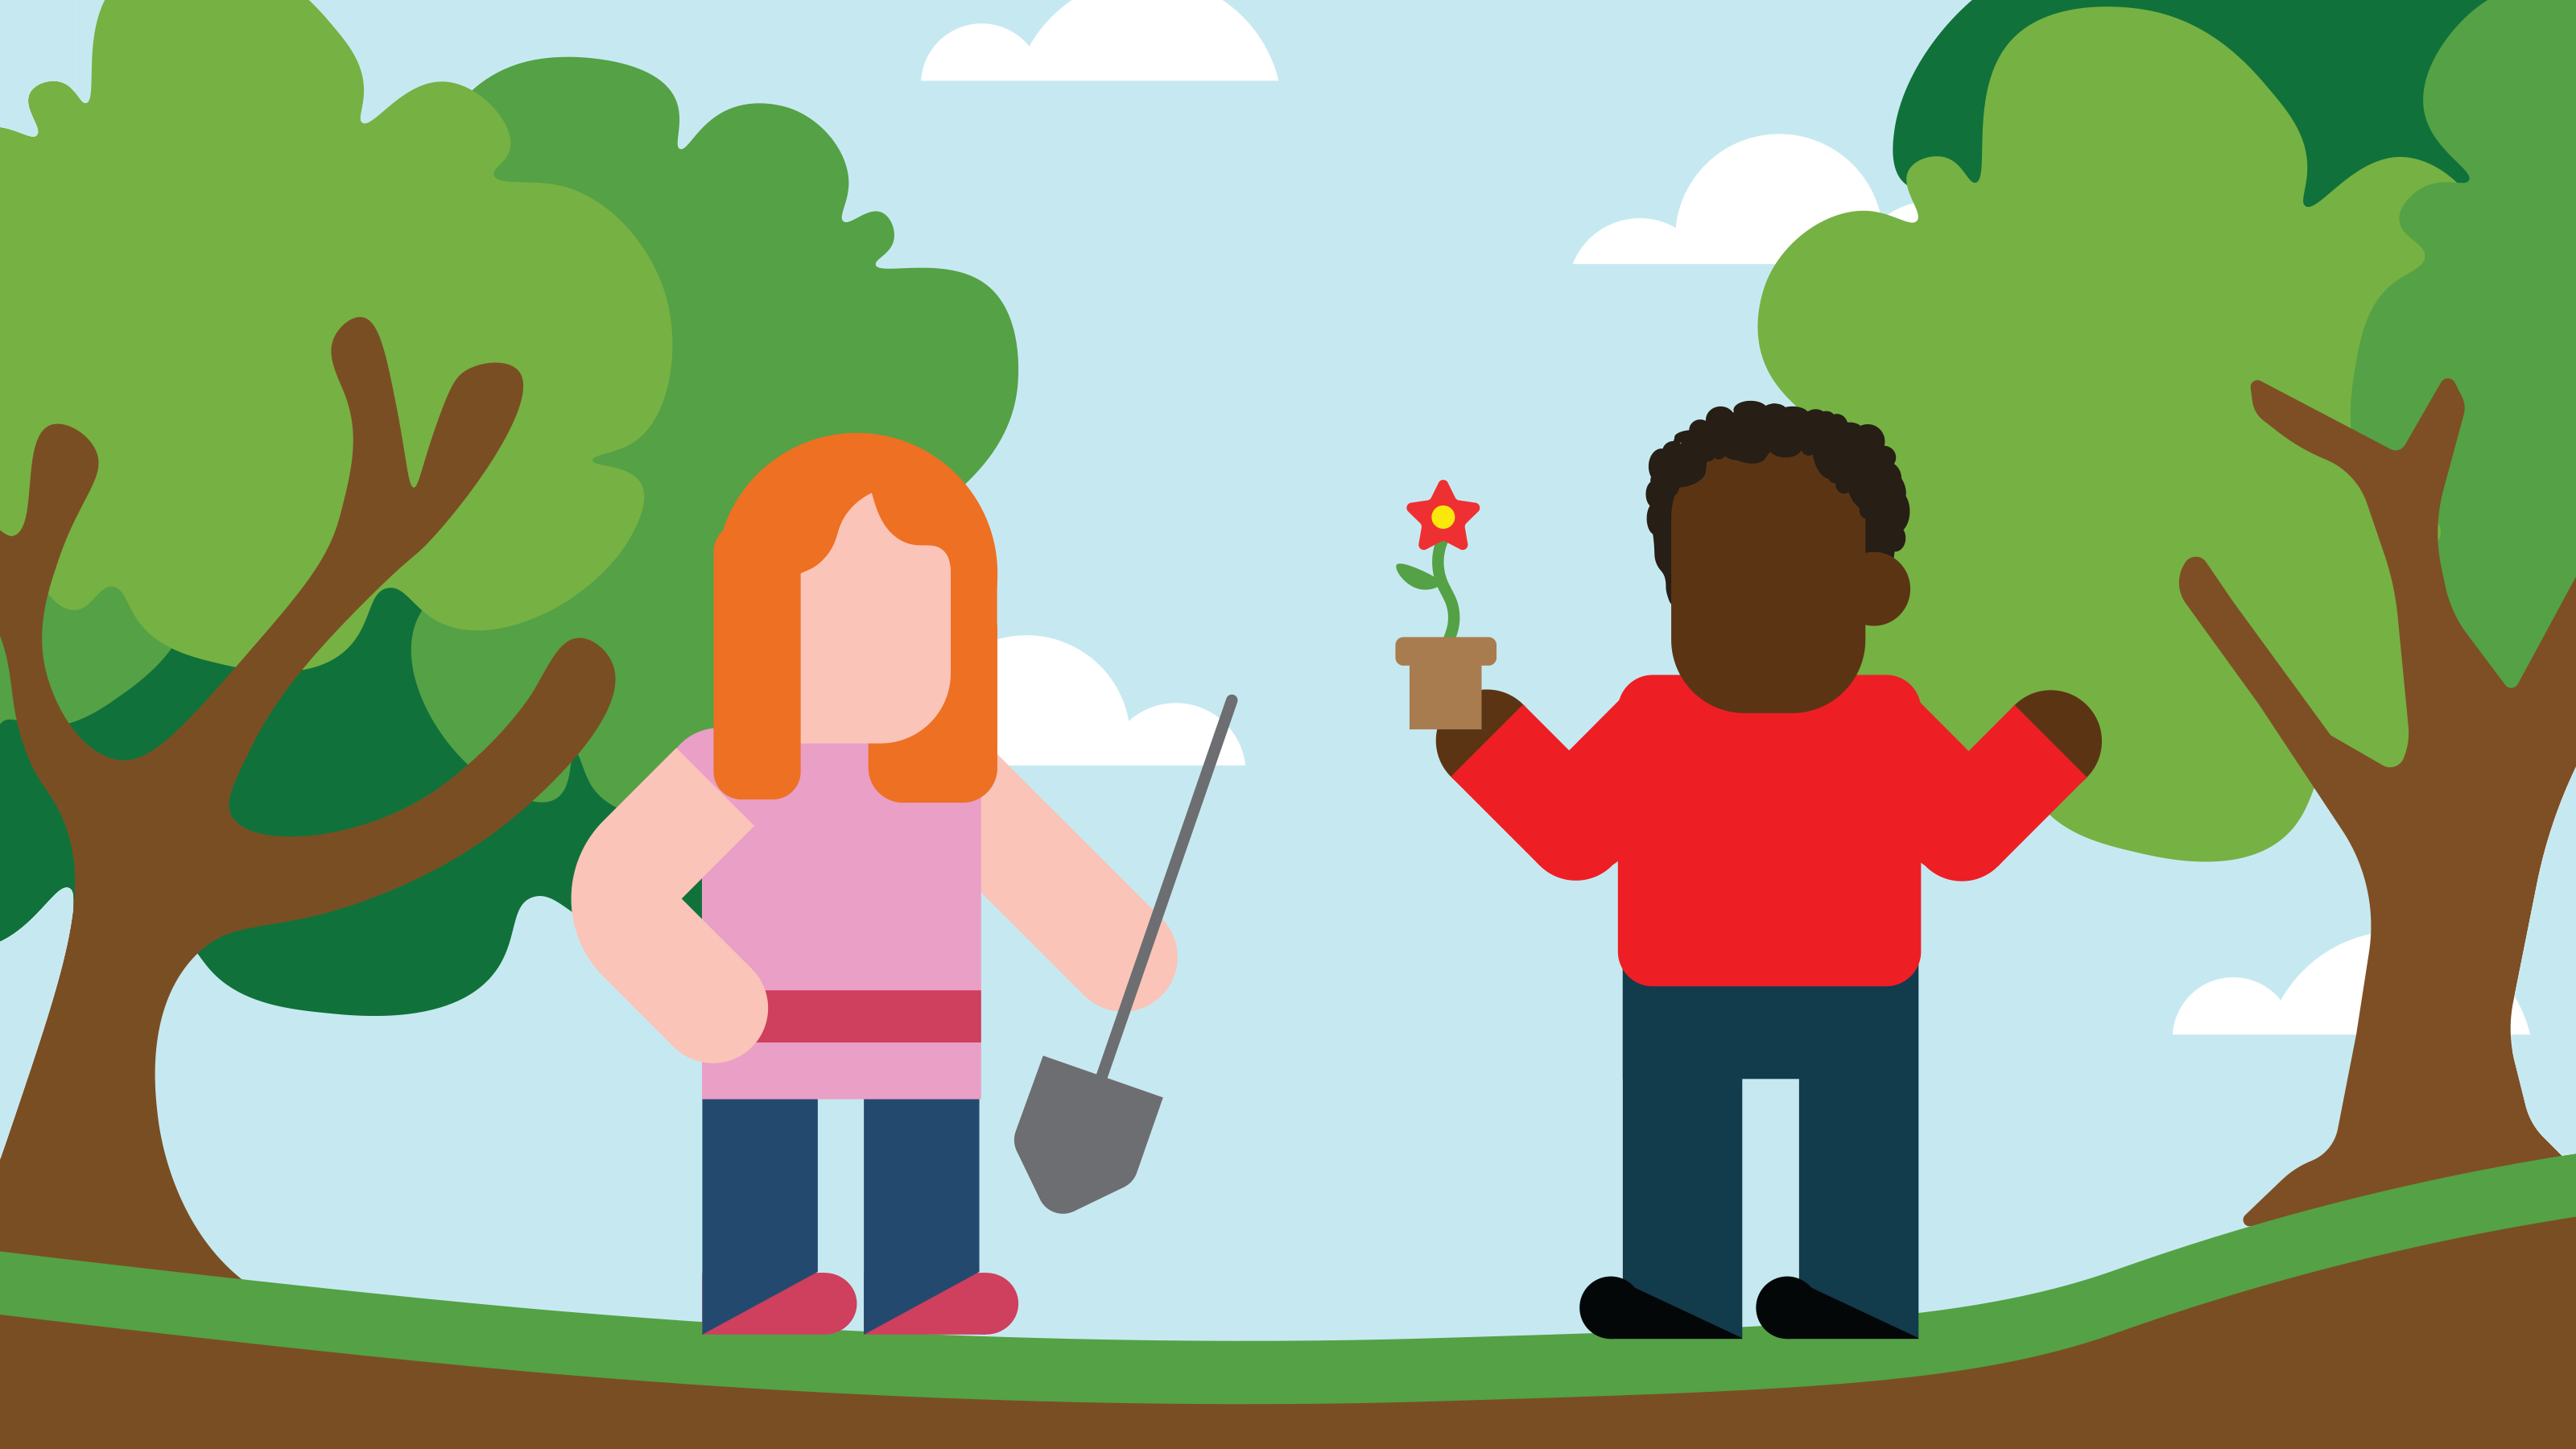 Two people gardening planting trees and flowers in a garden for sustainability